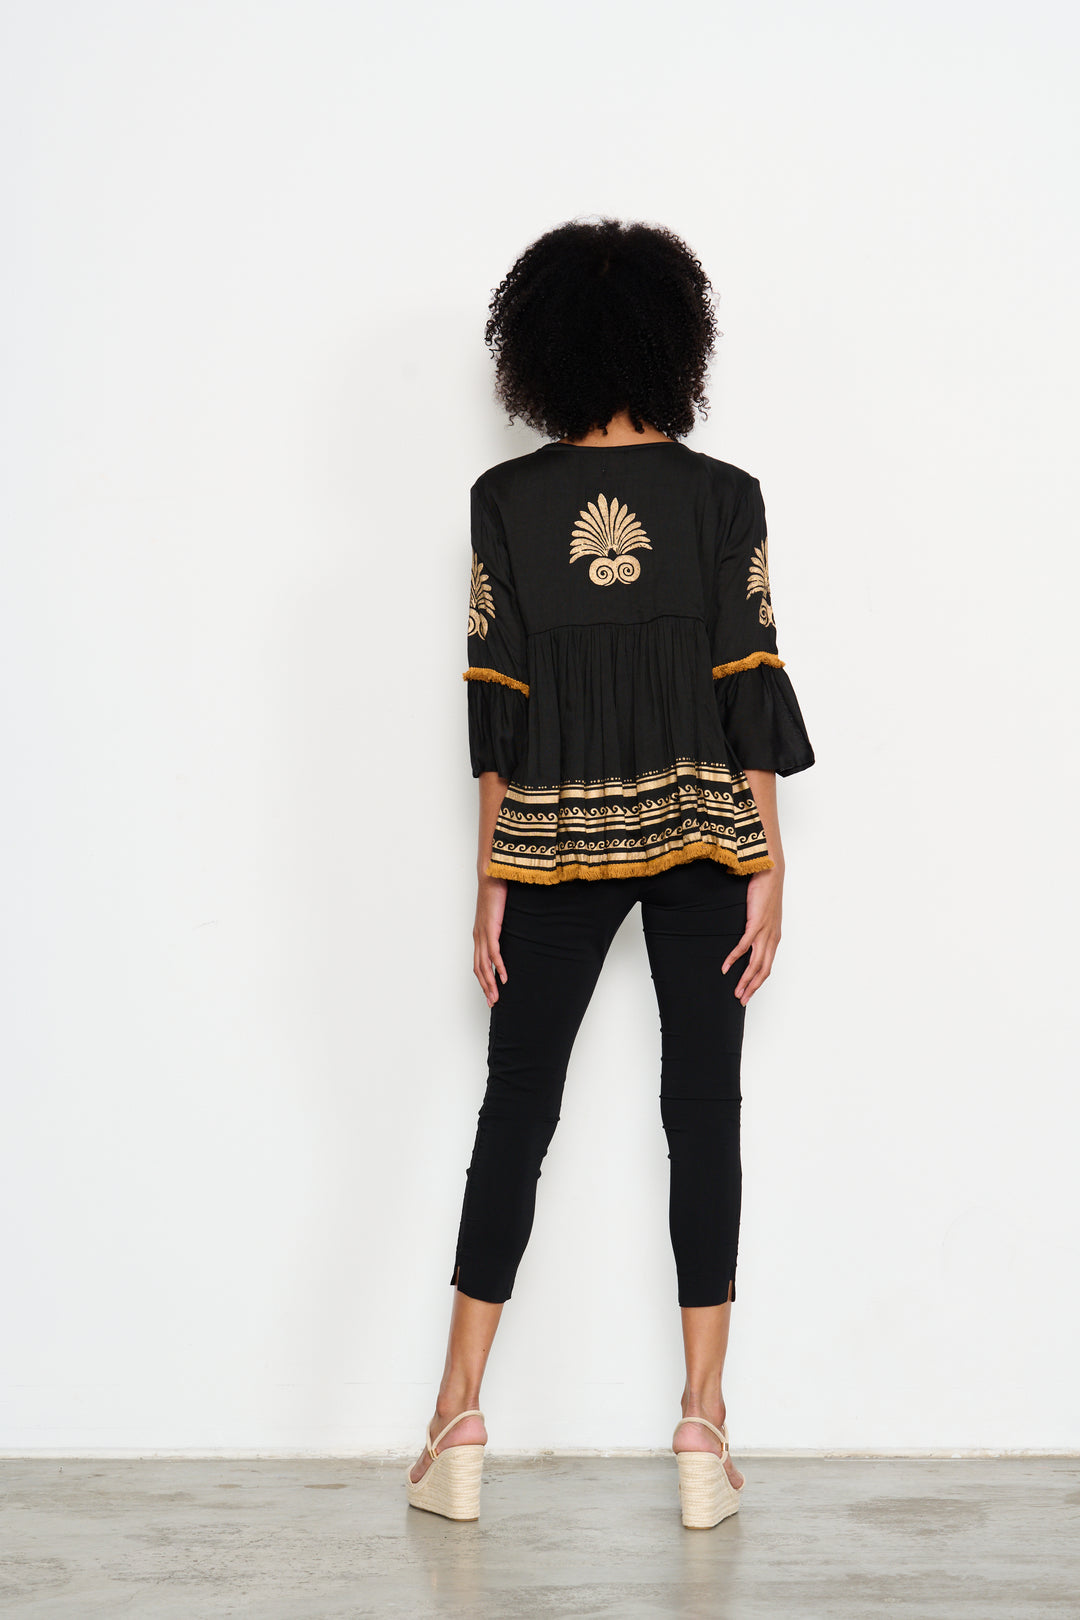 woman standing front view with black and gold jacket by Caju from Pizazz Boutique Nelson Bay